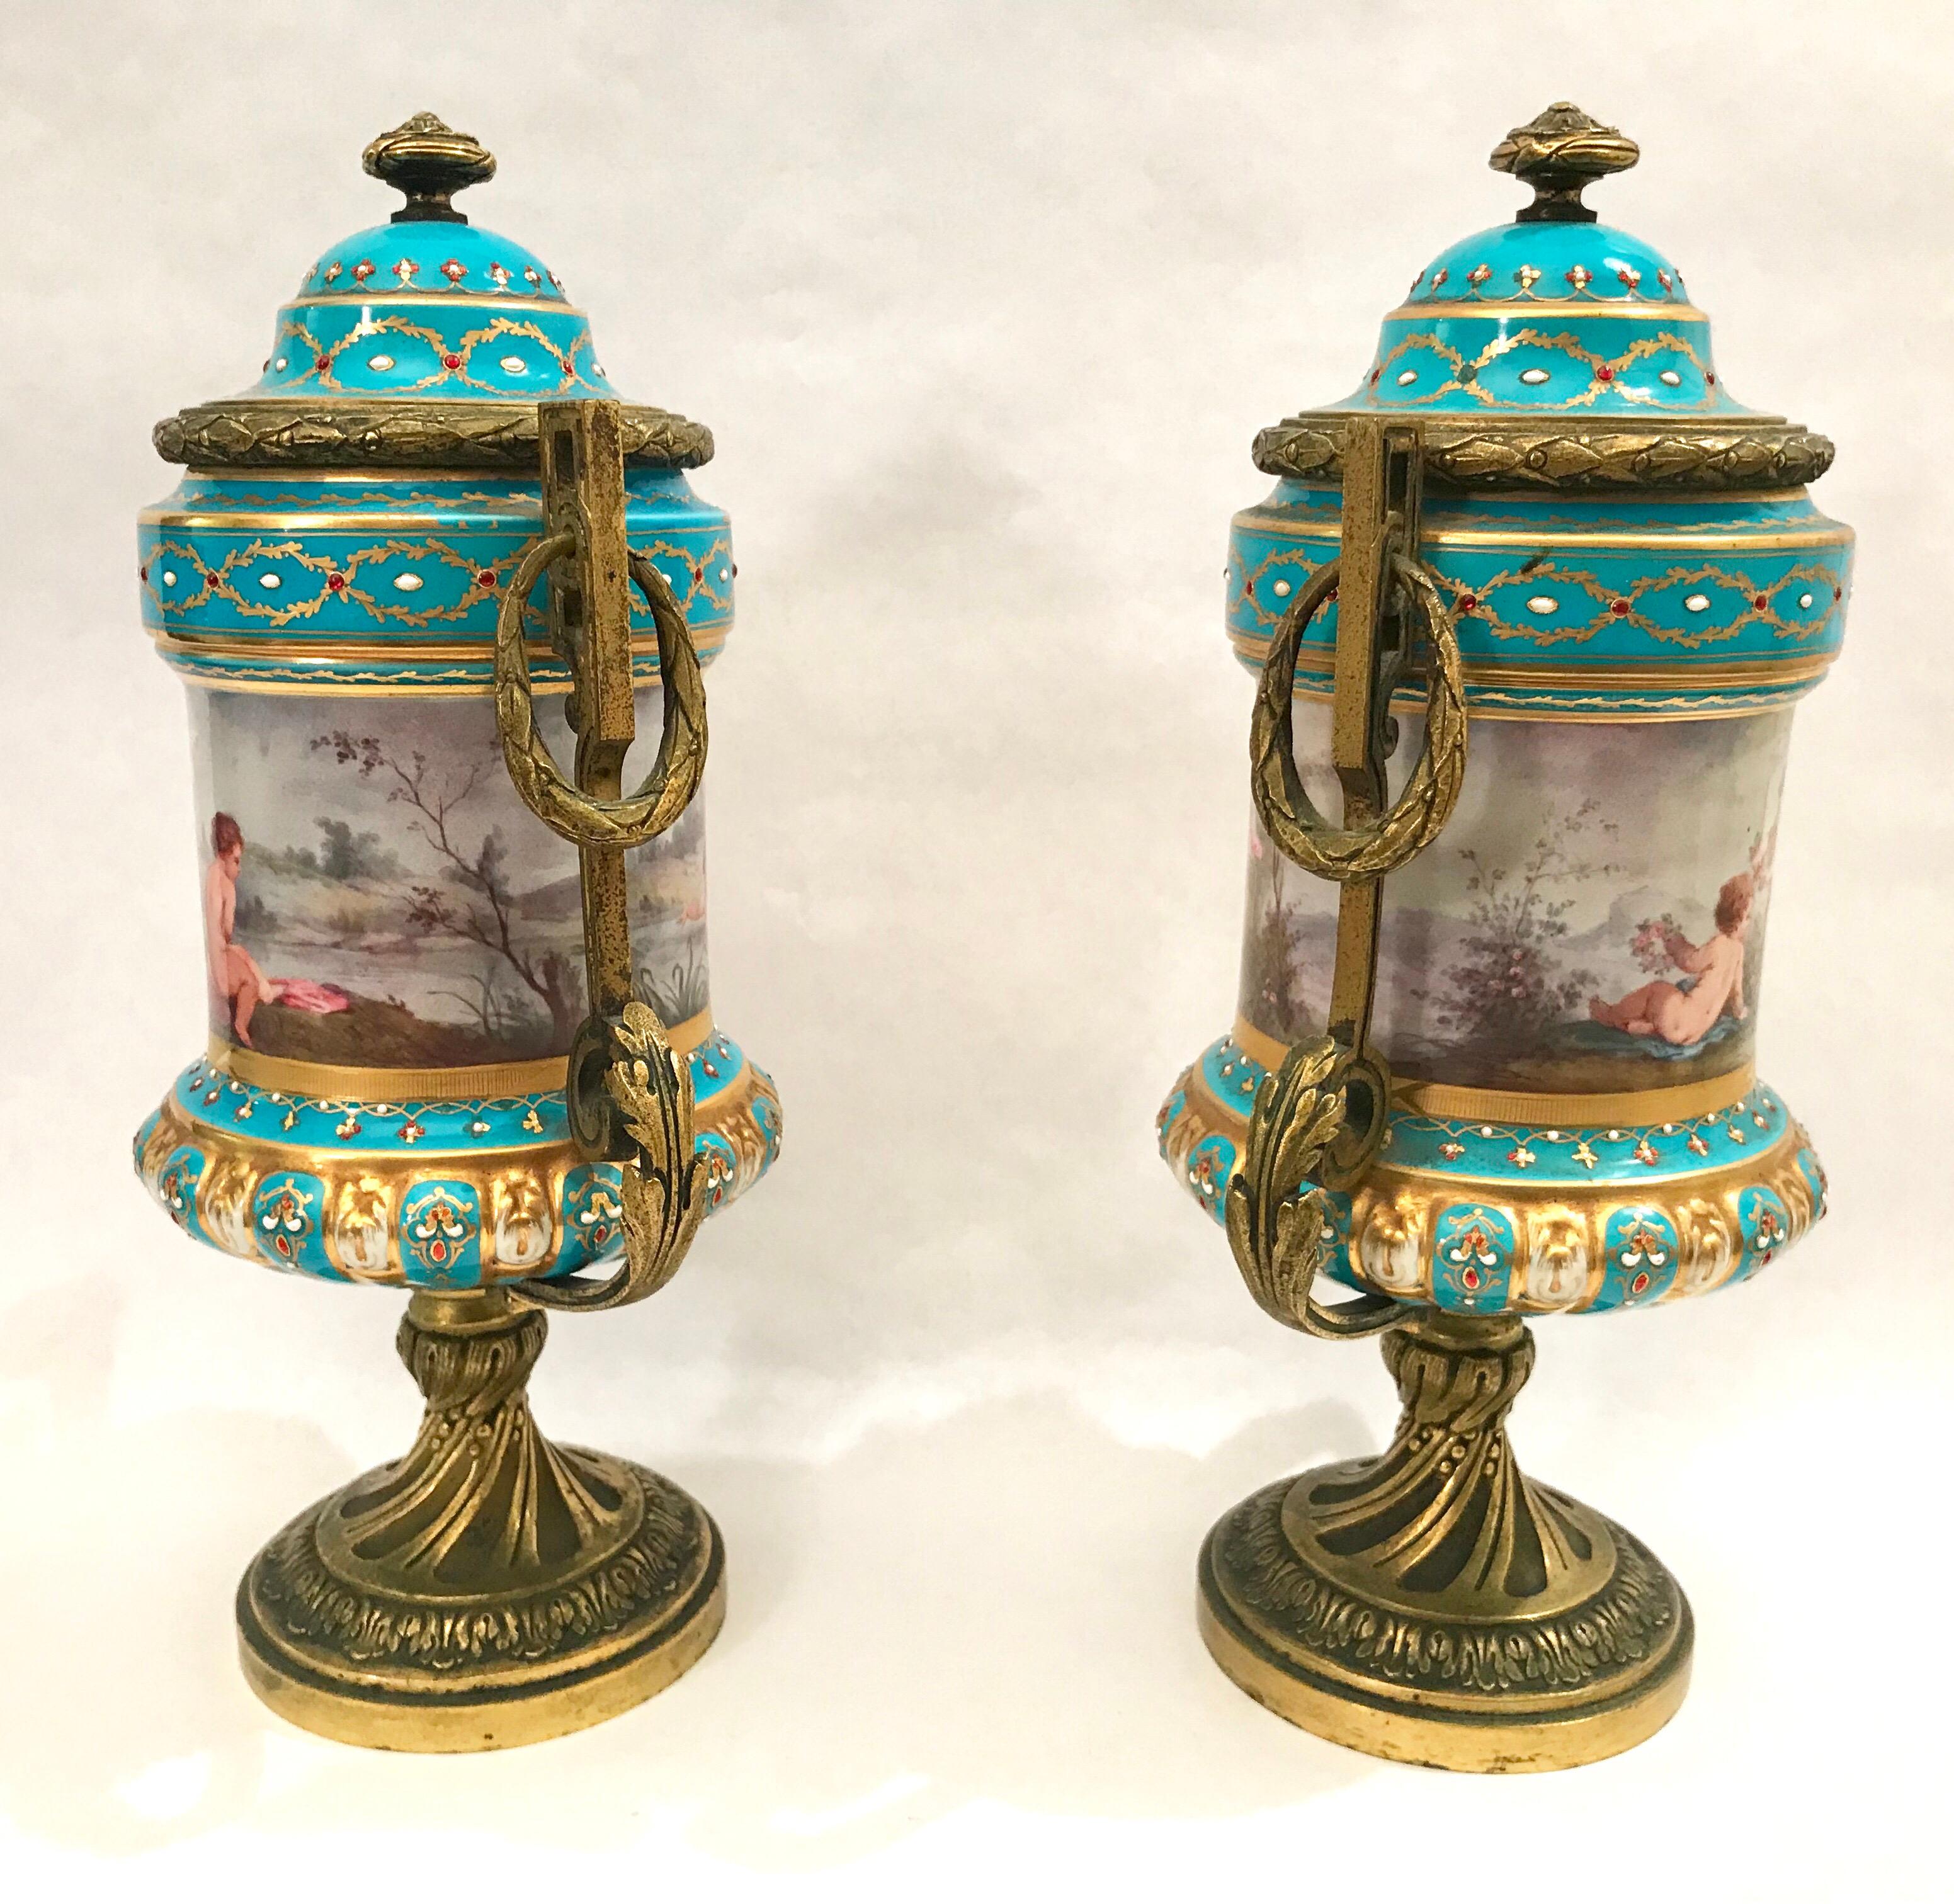 Pair of French Gilt Bronze Mounted Porcelain Lidded Urns For Sale 10